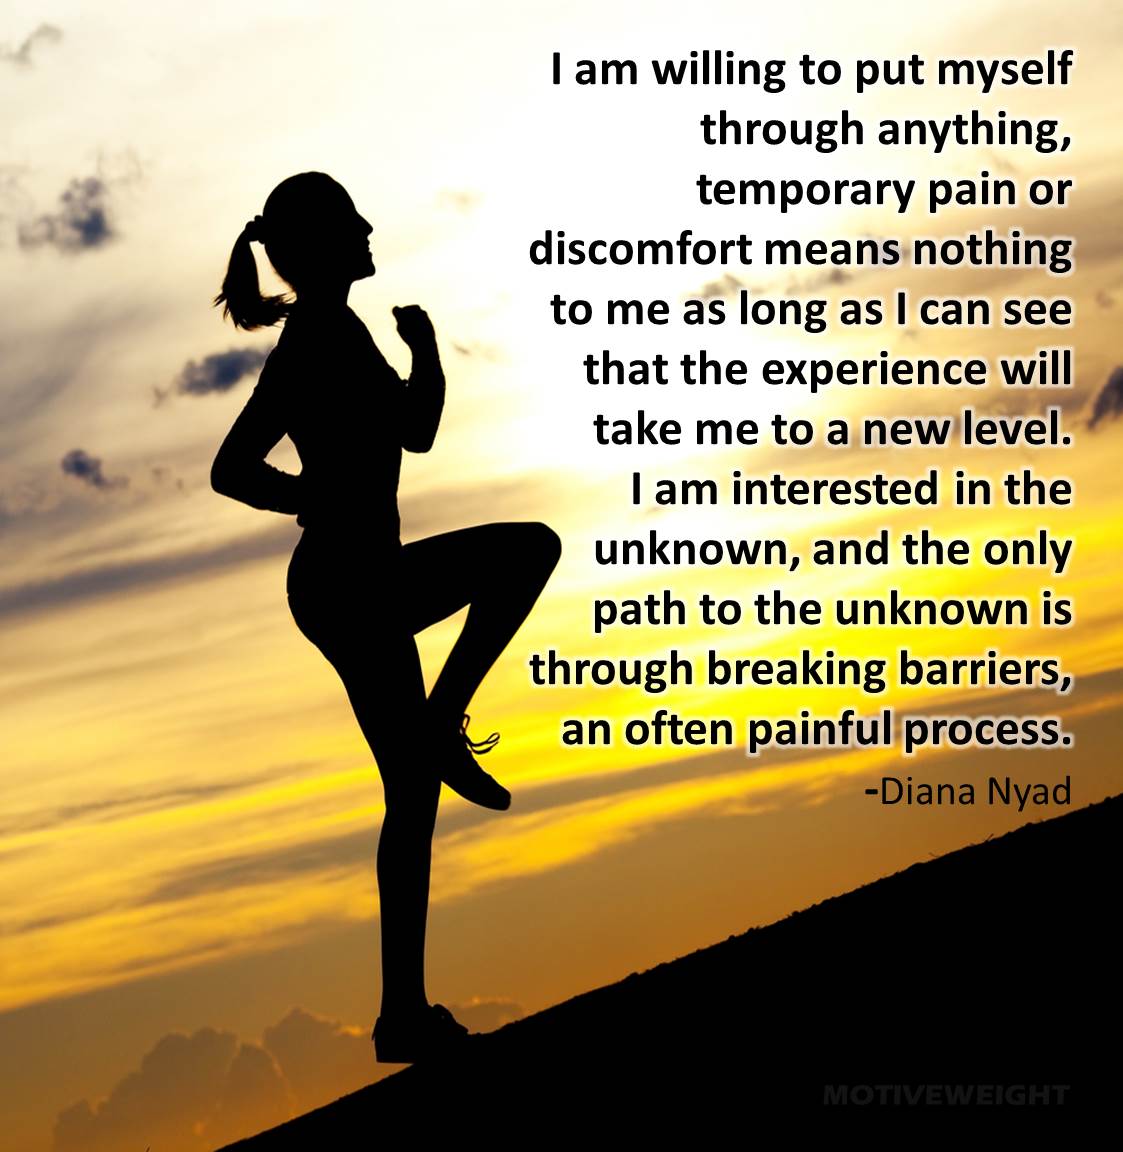 I am willing to put myself through anything; temporary pain or discomfort means nothing to me as long as I can see that the experience will take me to a new level ...Diana Nyad